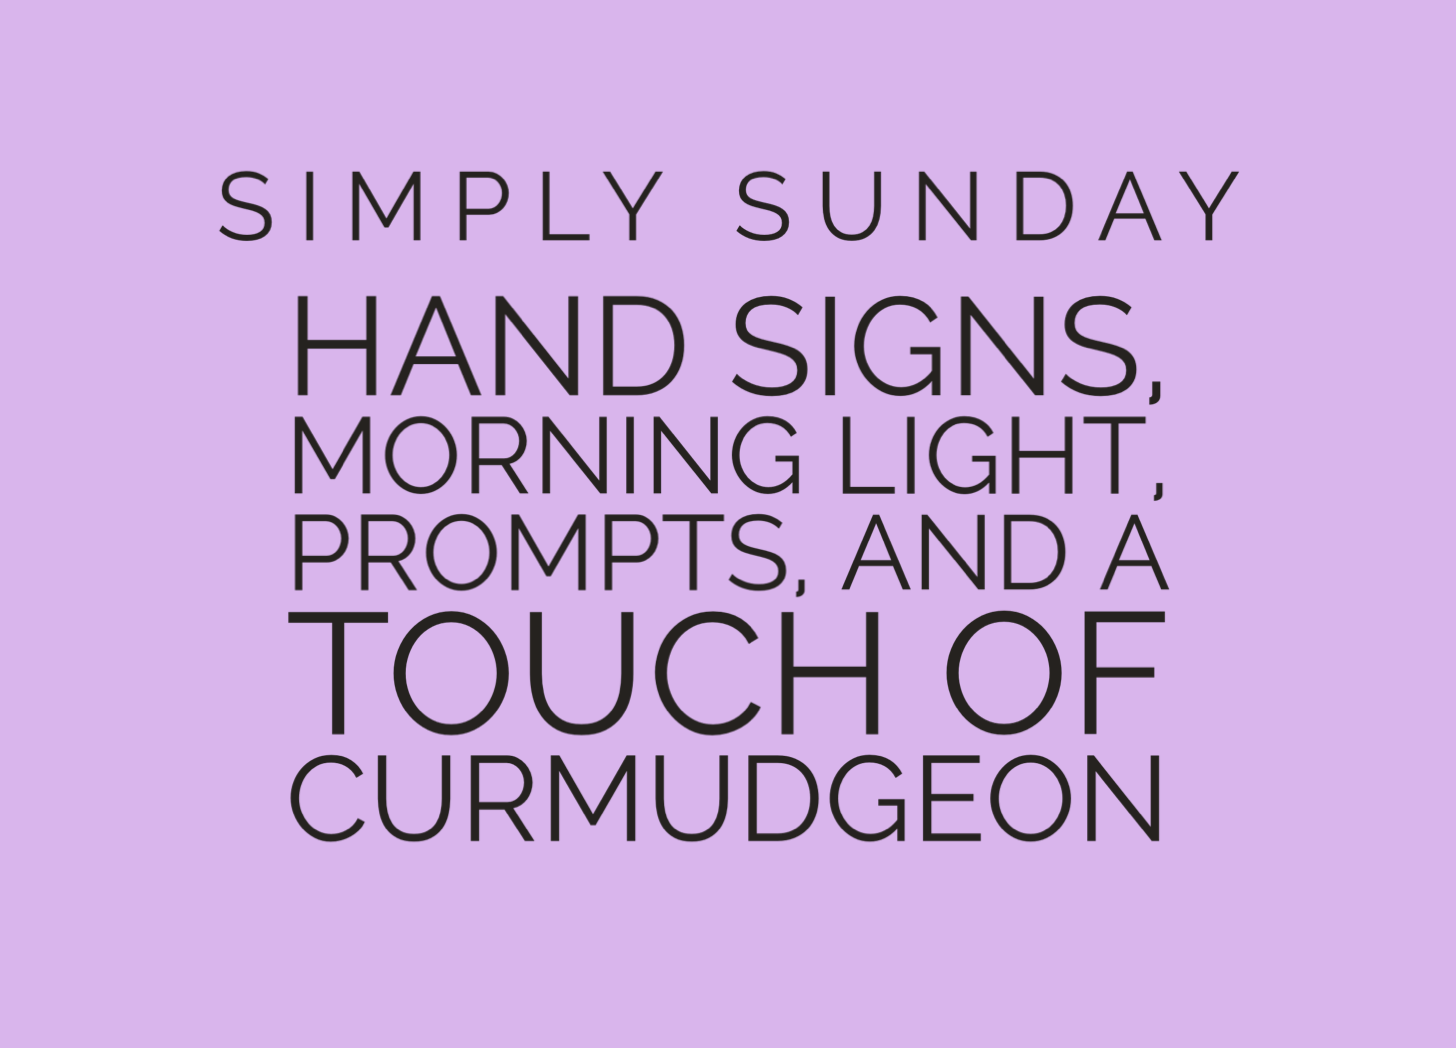 Drawing hand signs, morning light, Illustrate Your Week, and more!